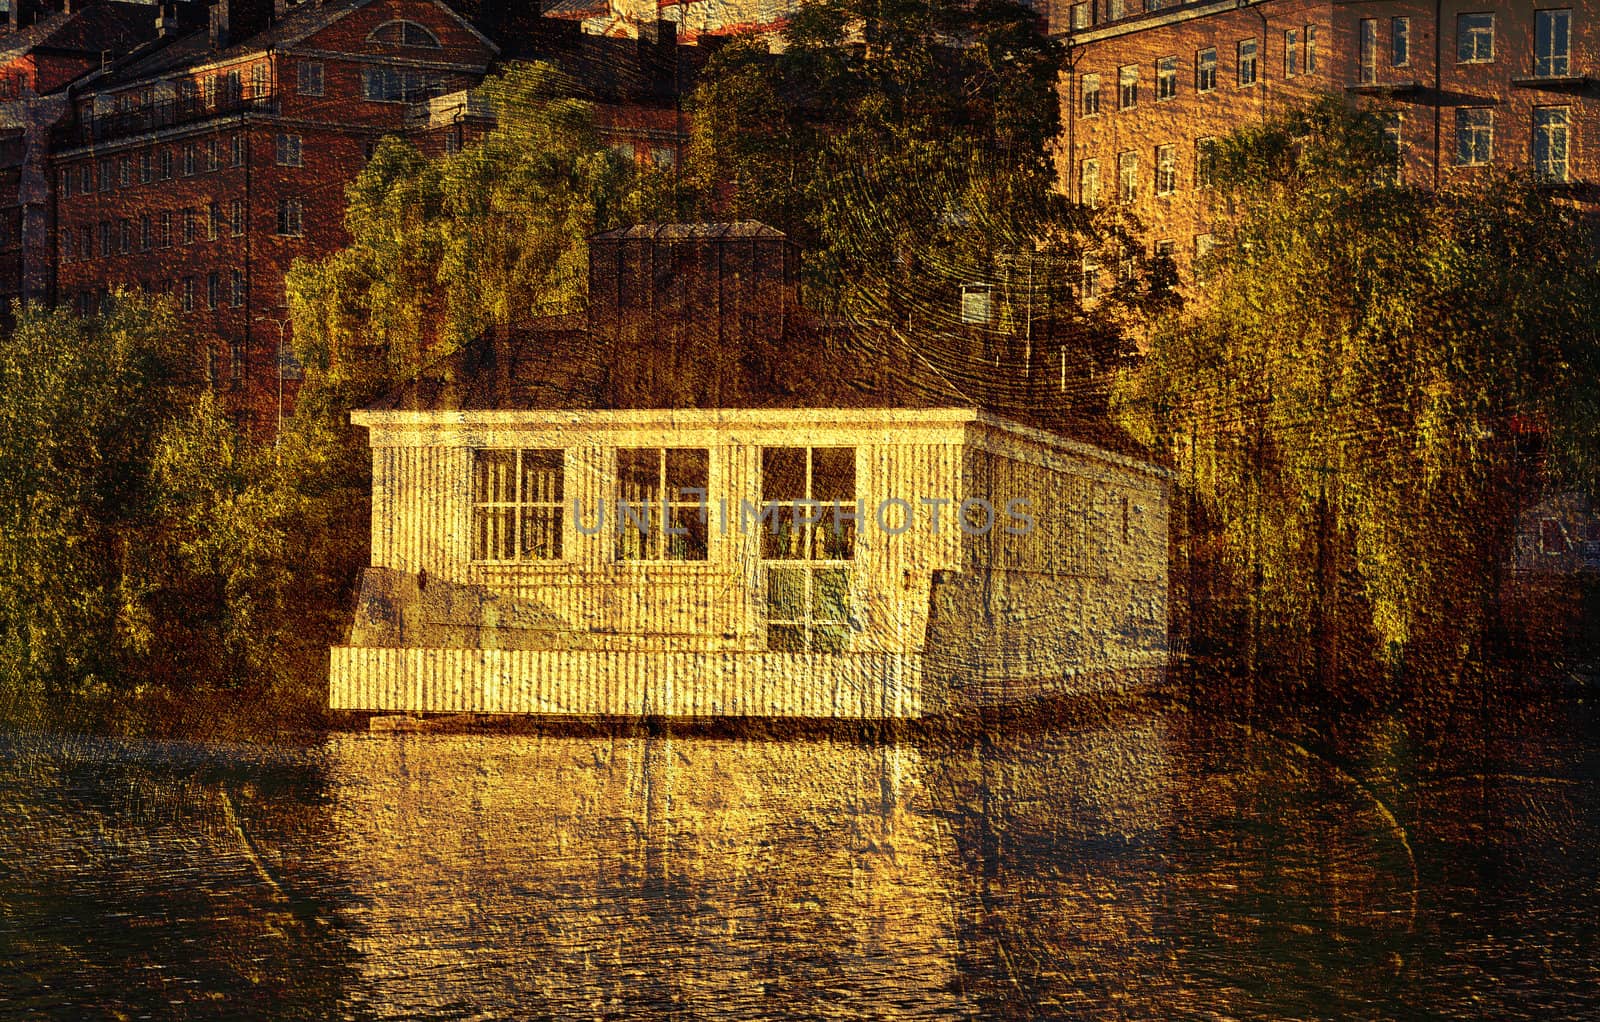 Liljeholmsbadet in stockholm from 1930. It�s a public bath house on the water.